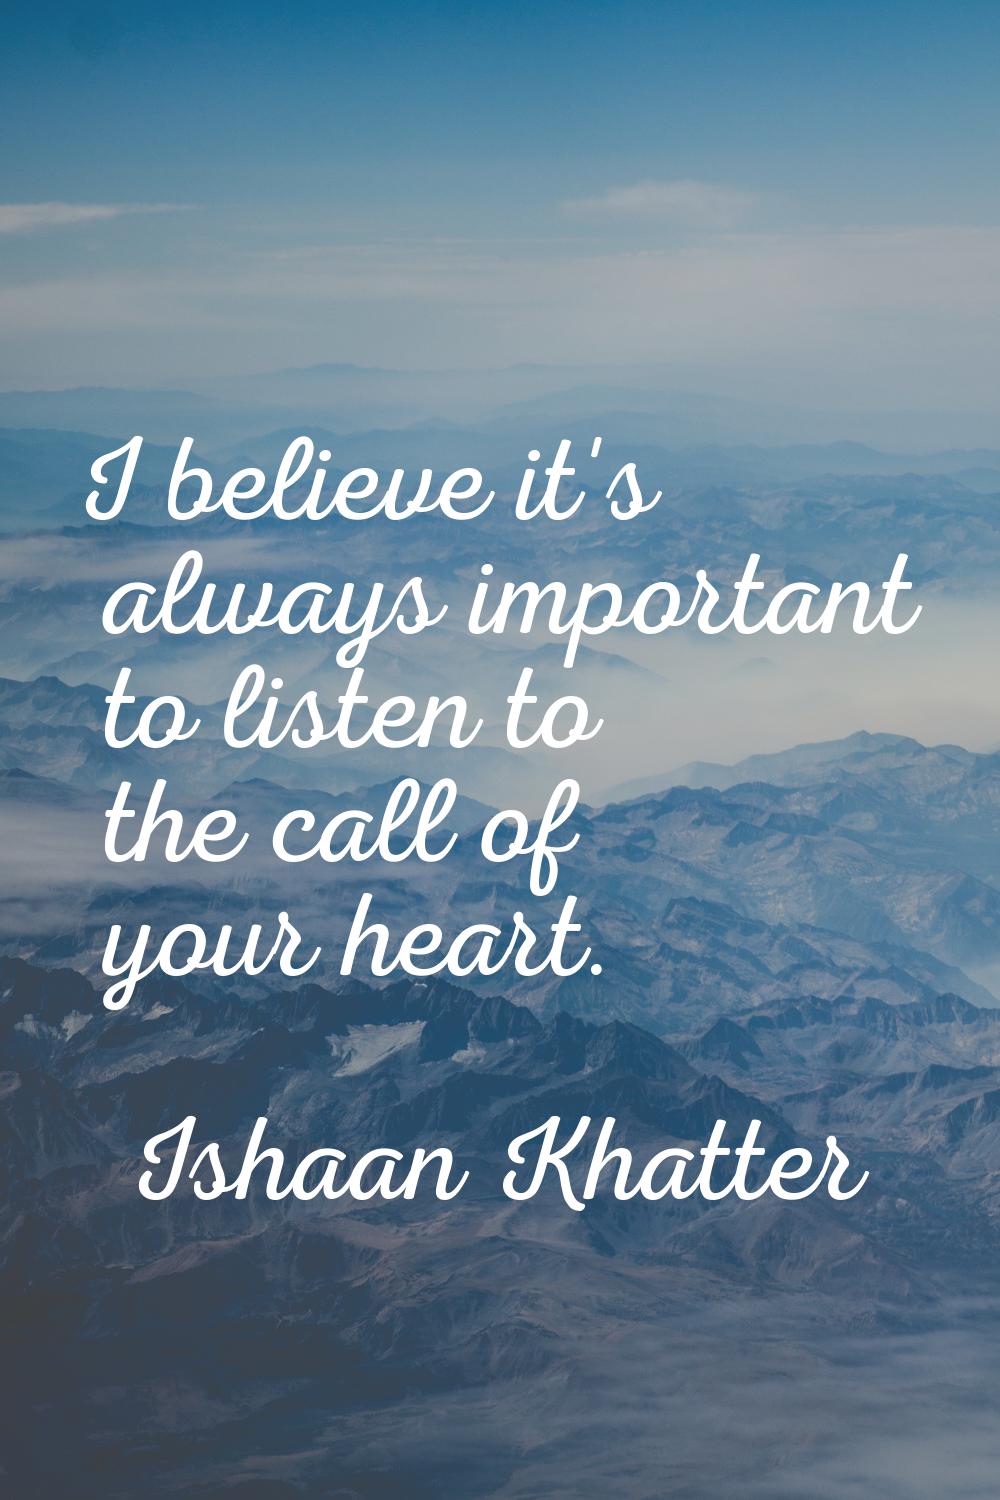 I believe it's always important to listen to the call of your heart.